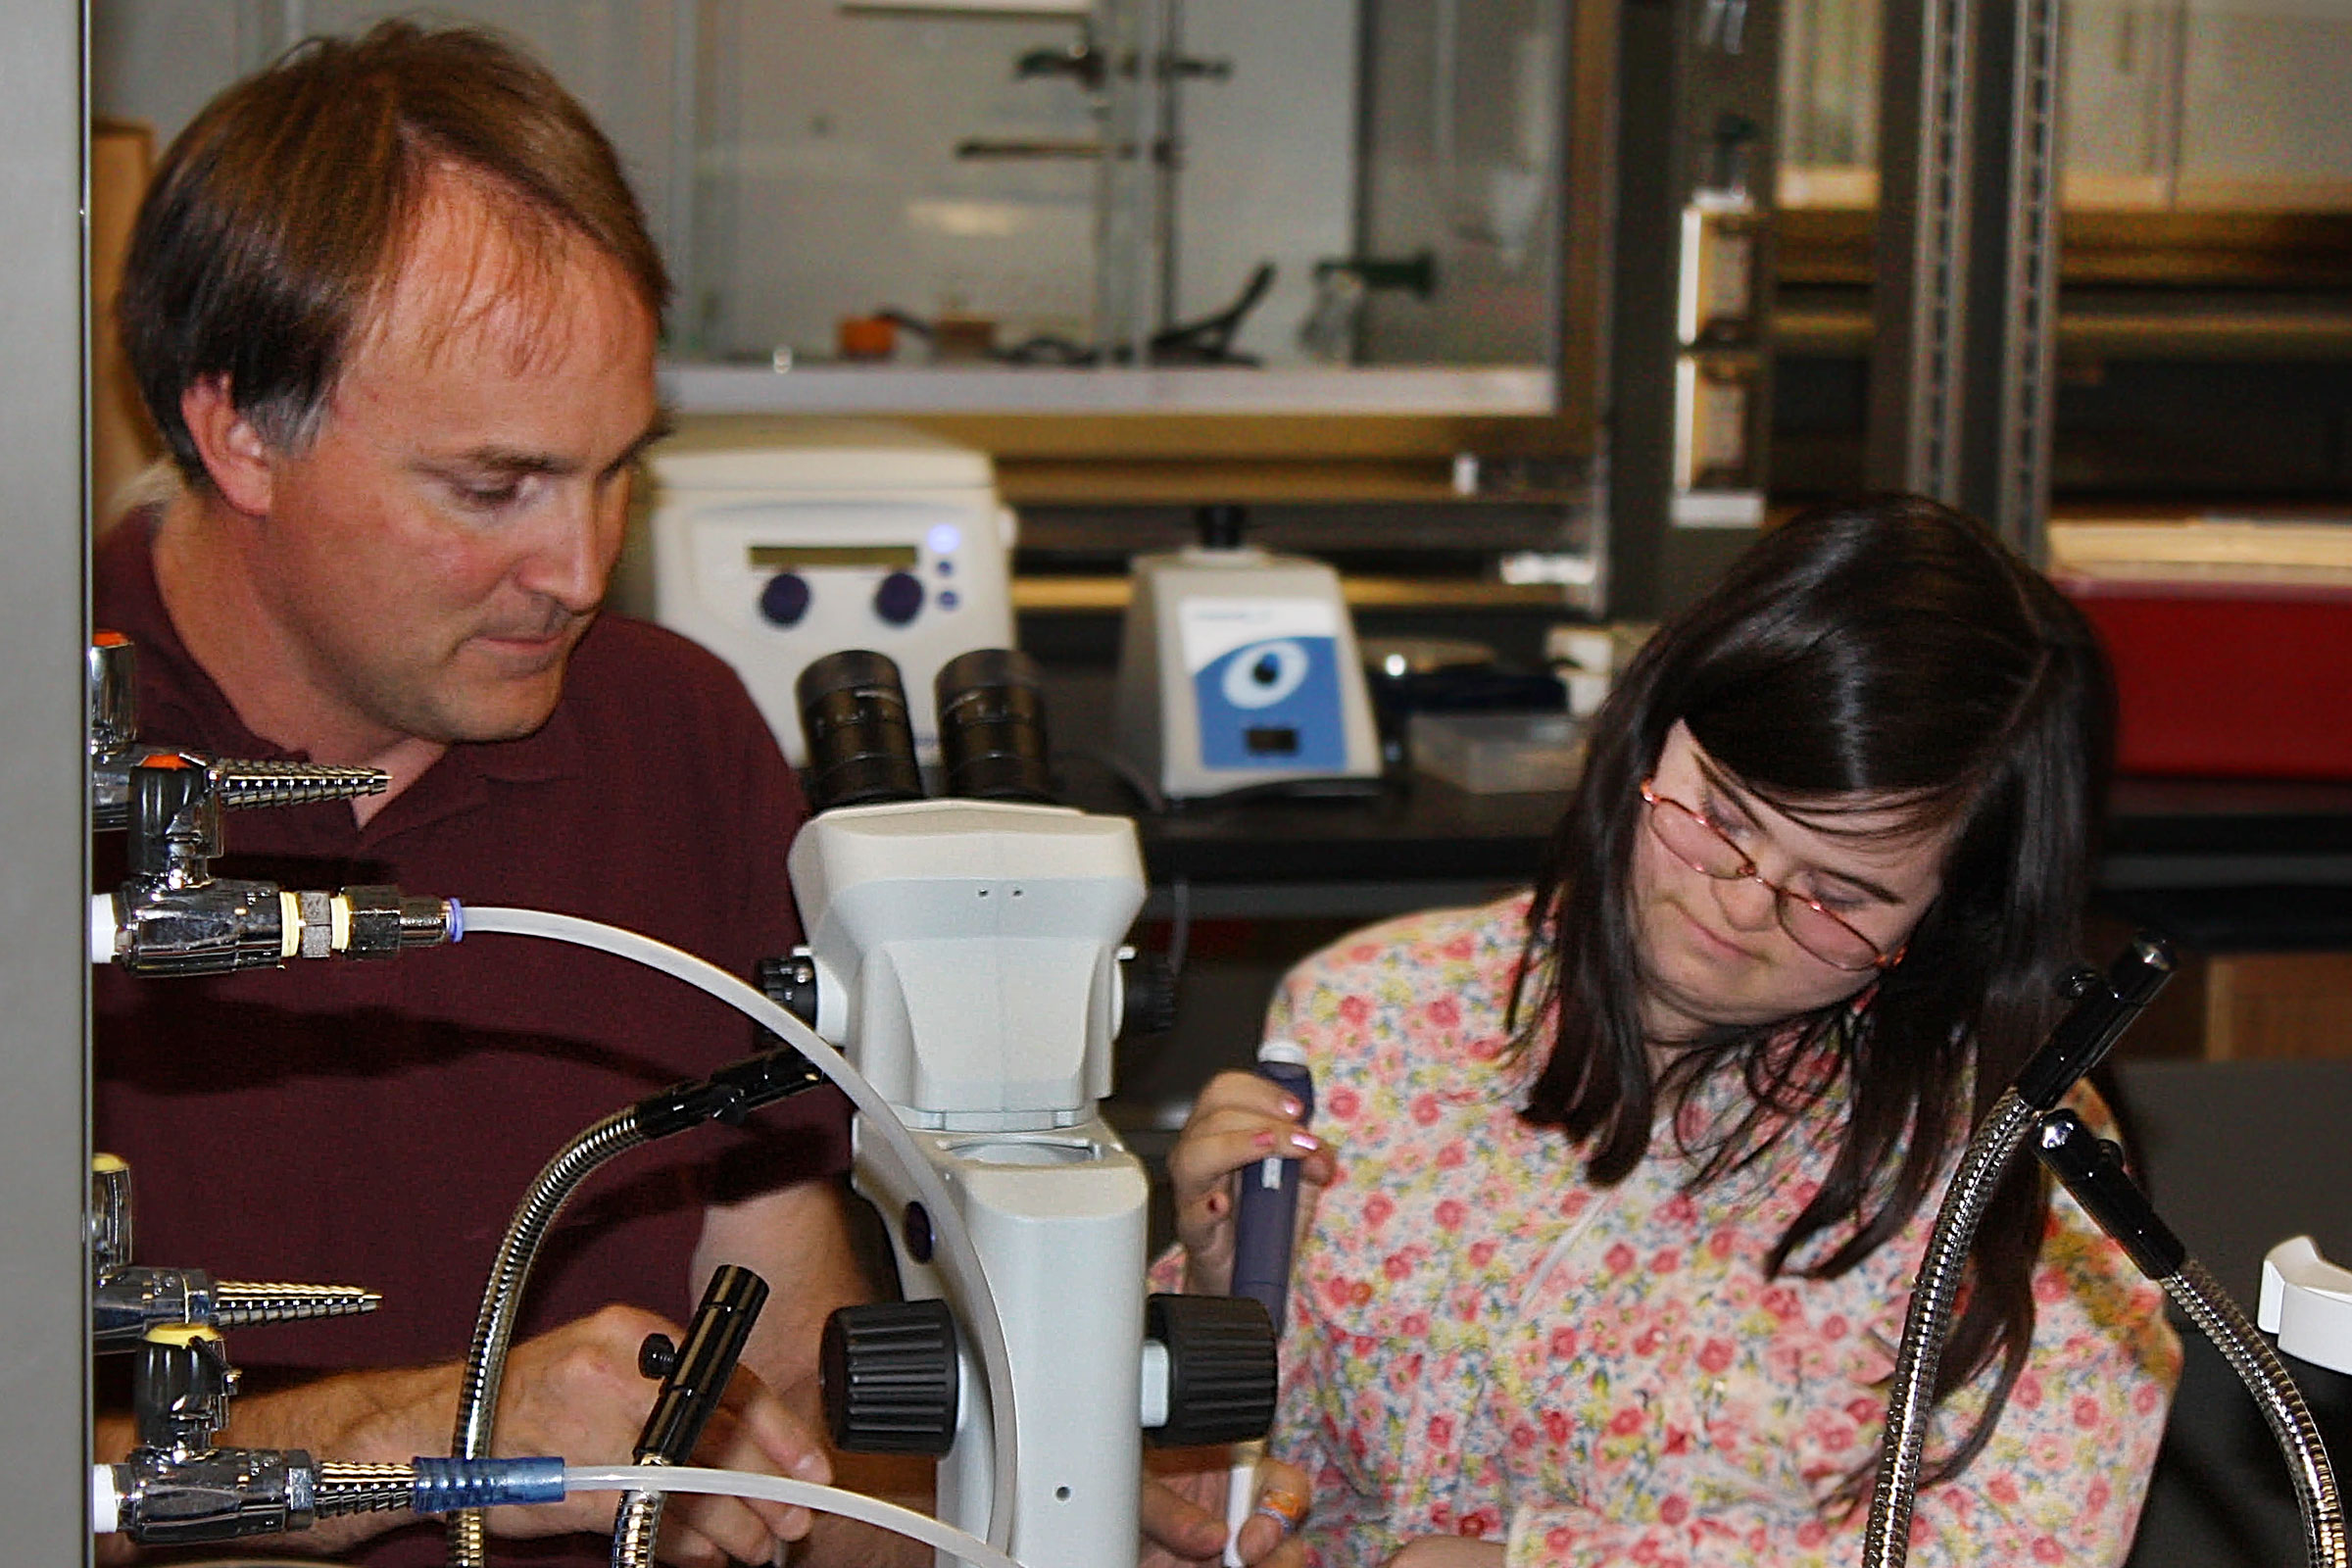 A scientist looks on in a lab as a student with developmental disabilities operates equipment.